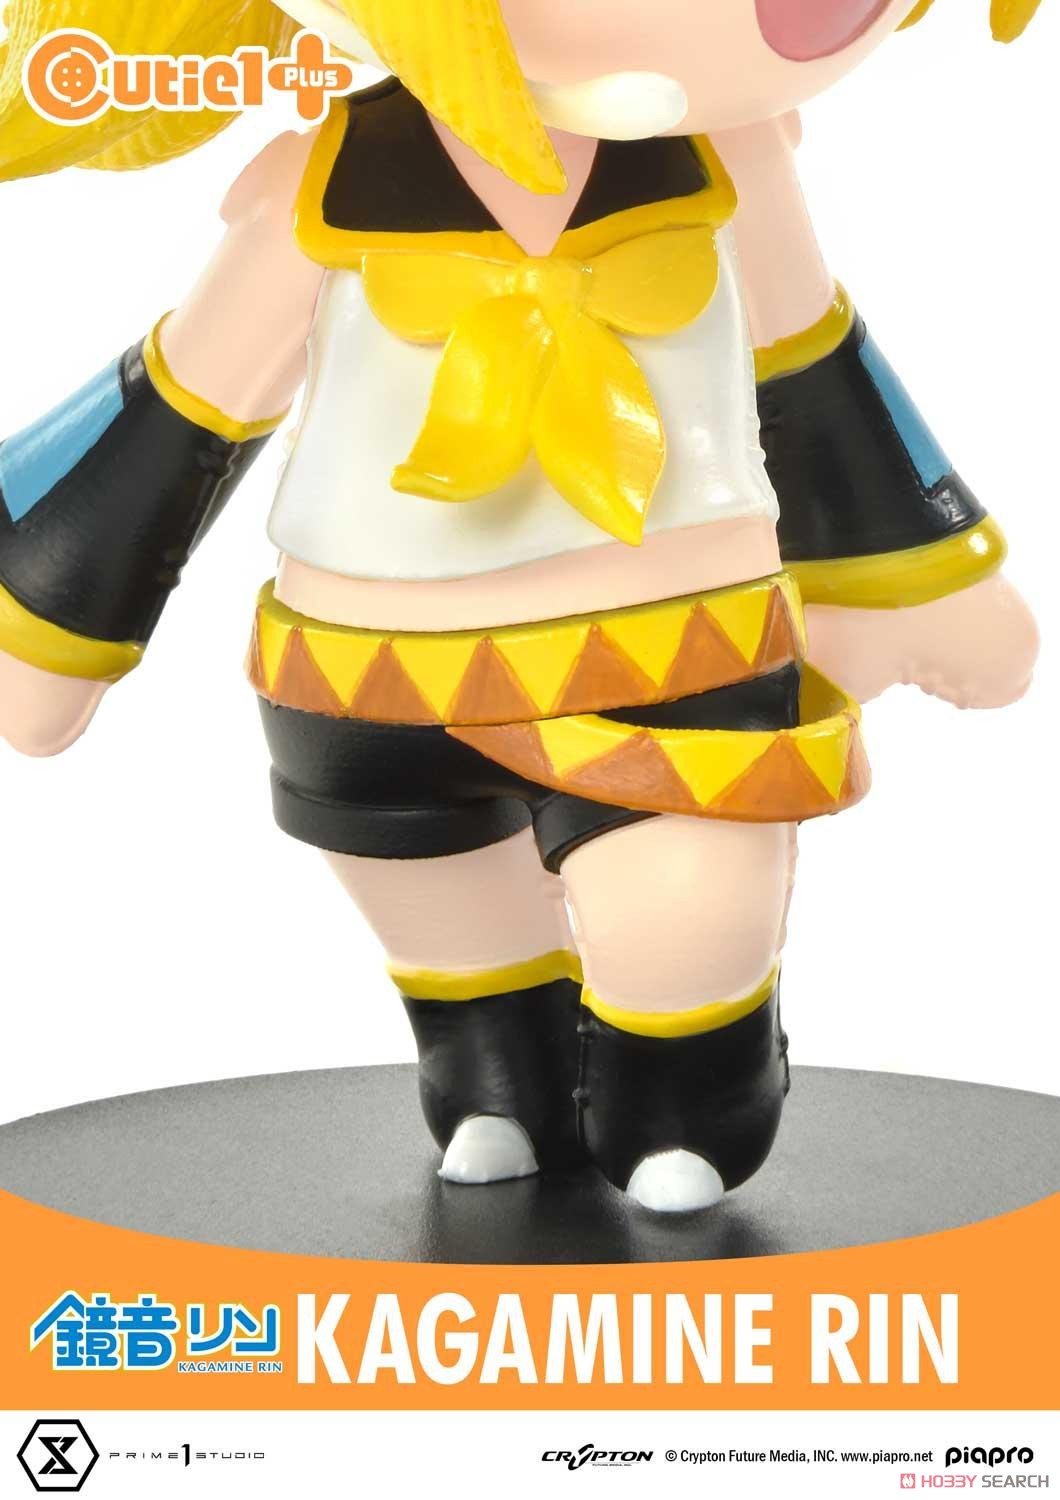 Cutie1 Plus Piapro Characters Kagamine Rin (Completed) Item picture9